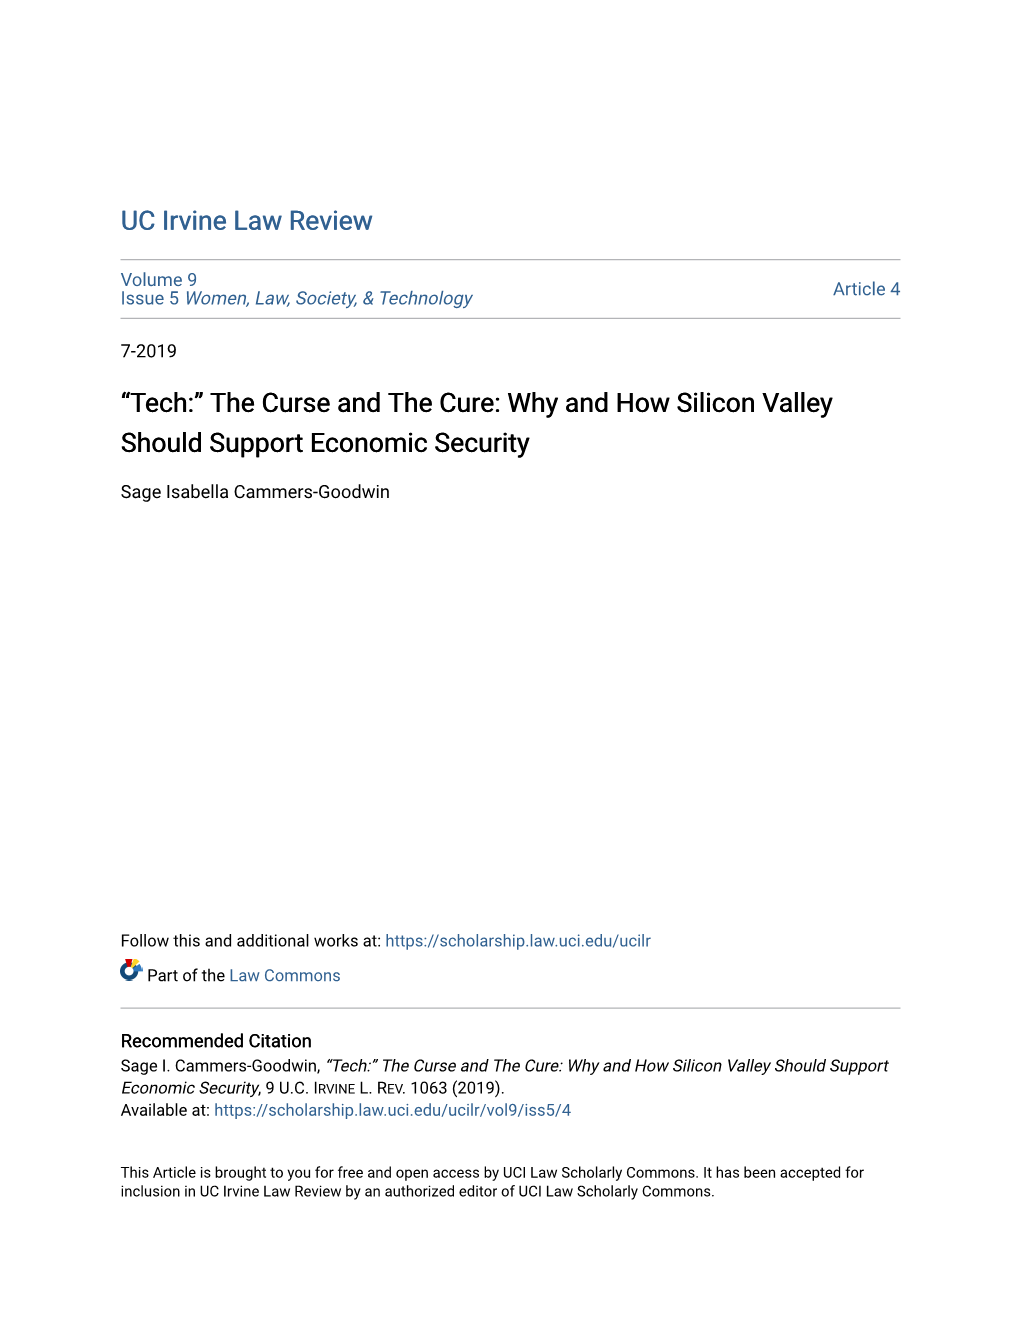 Why and How Silicon Valley Should Support Economic Security